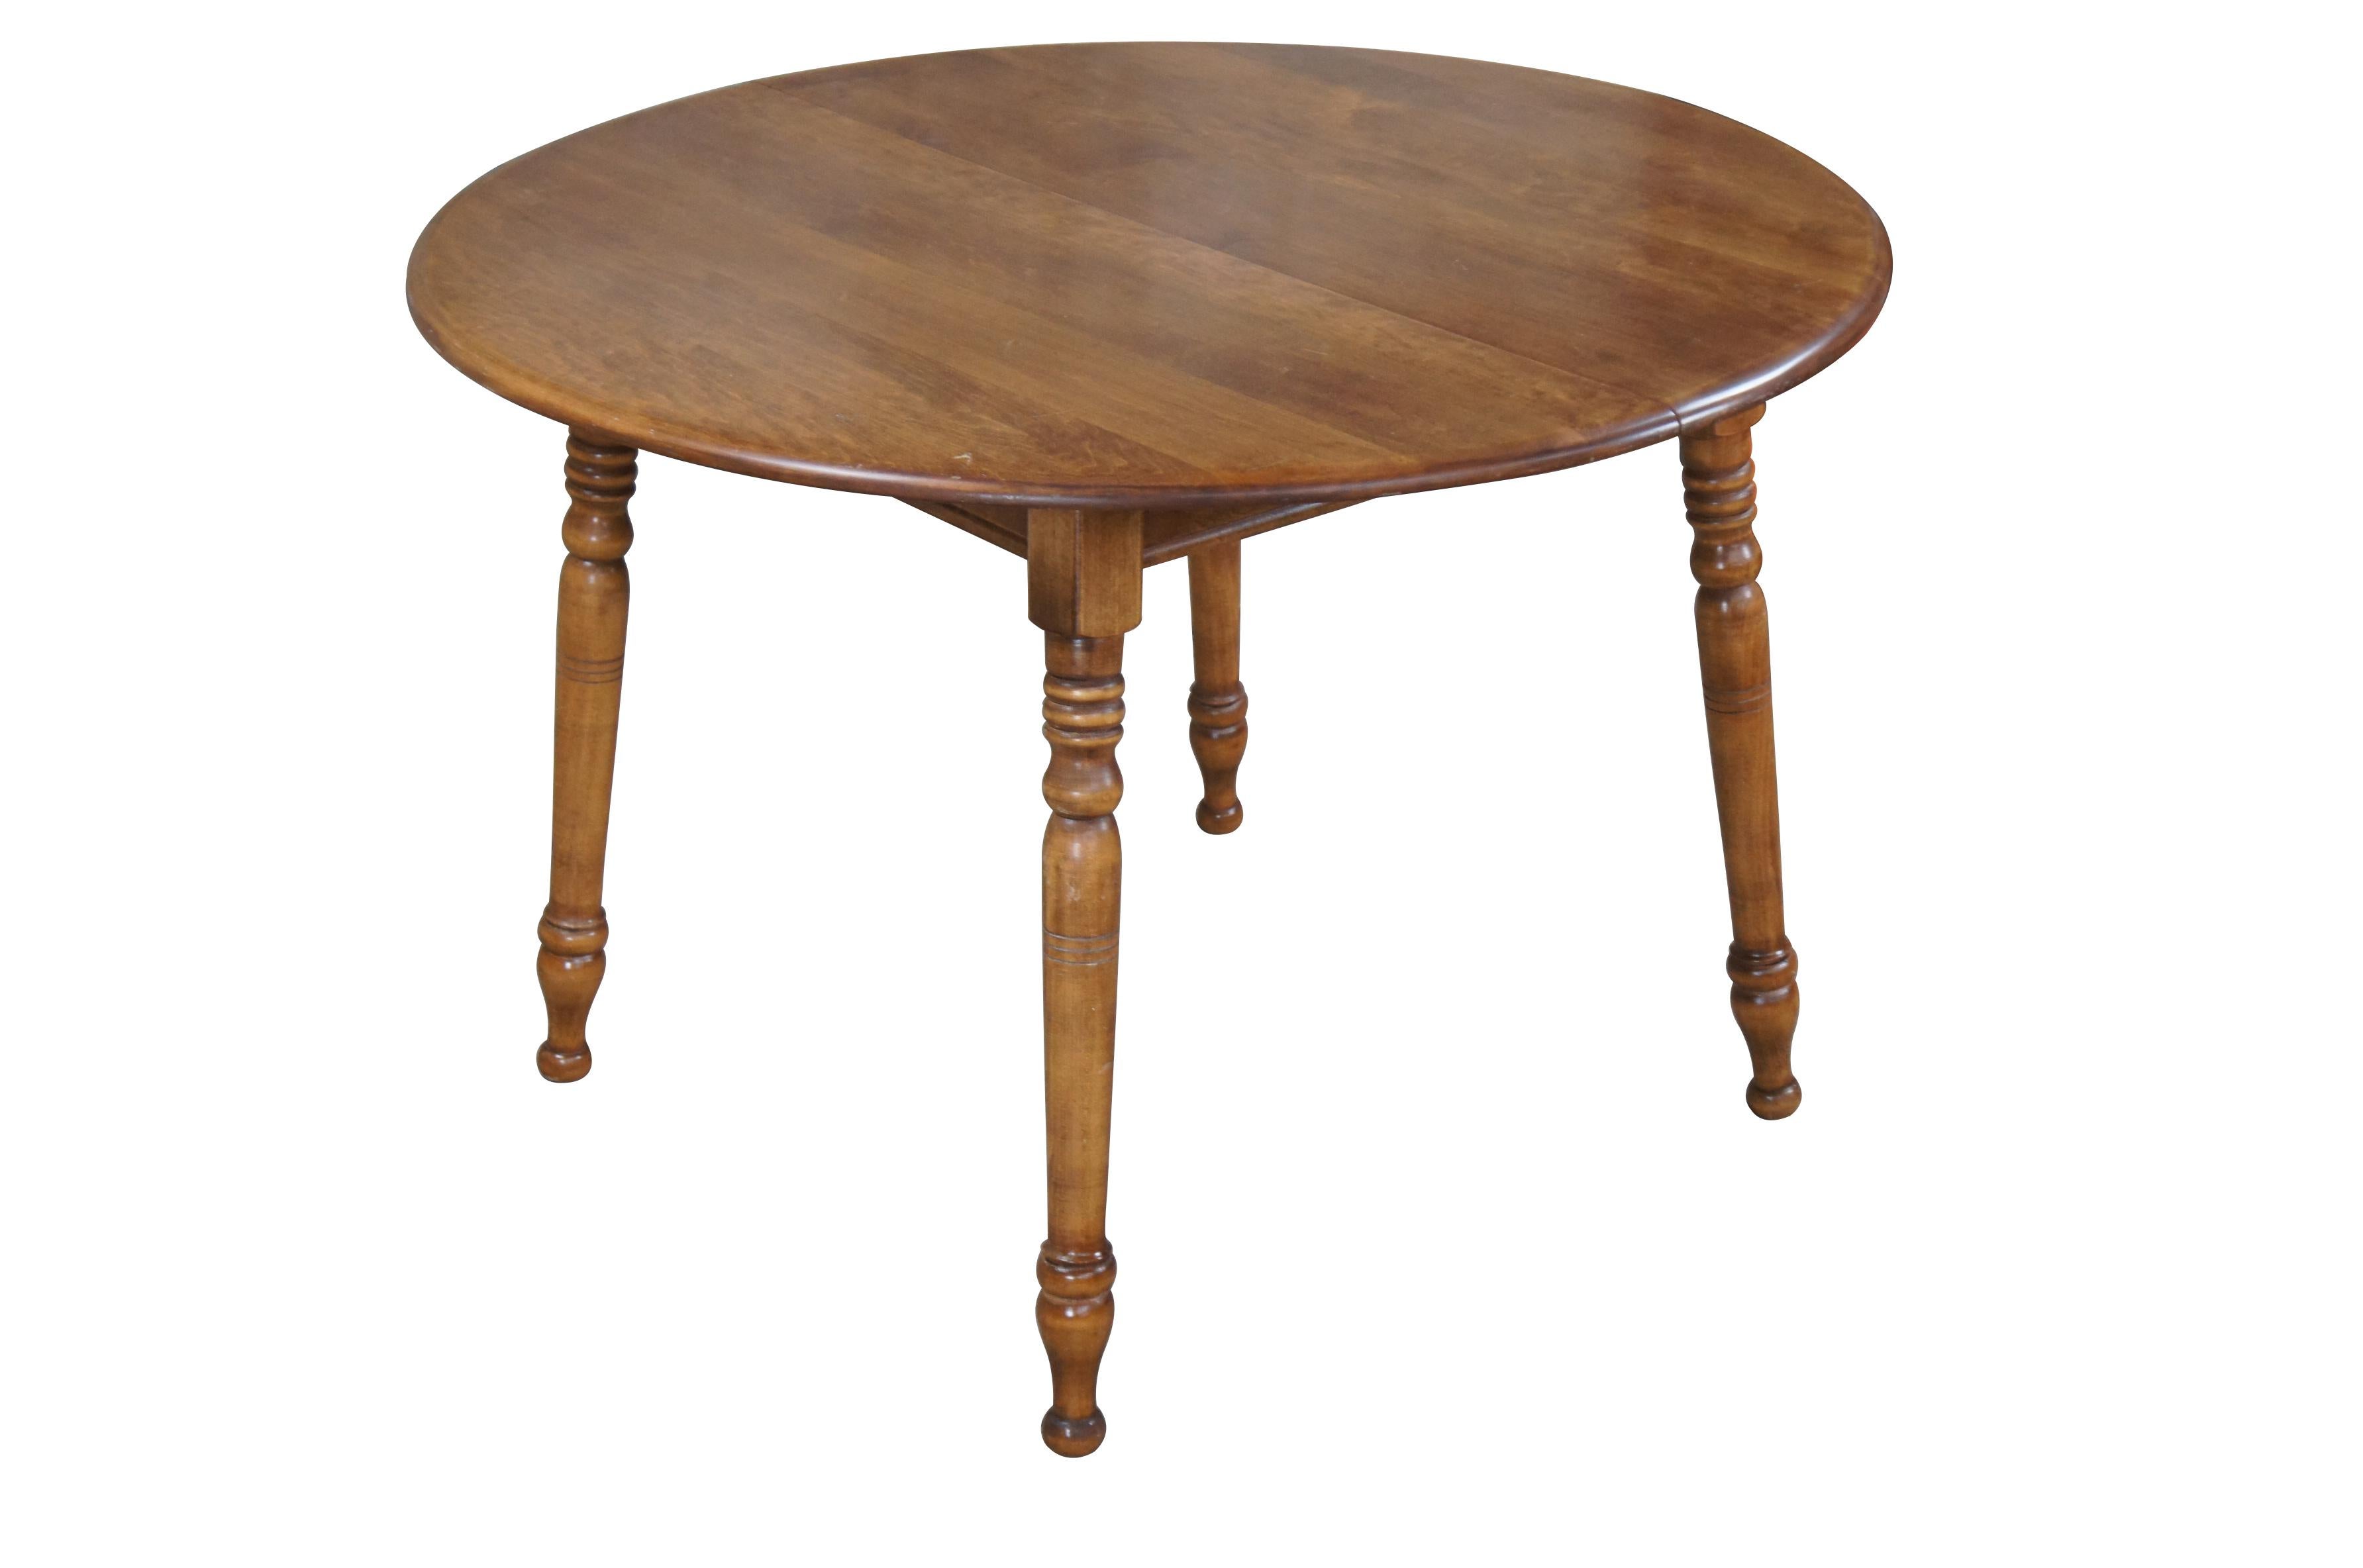 Early American style round dining table, circa second half 20th century.  Made from maple with turned legs leading to toupie feet.  Features two leaves allowing for expansion up to 66